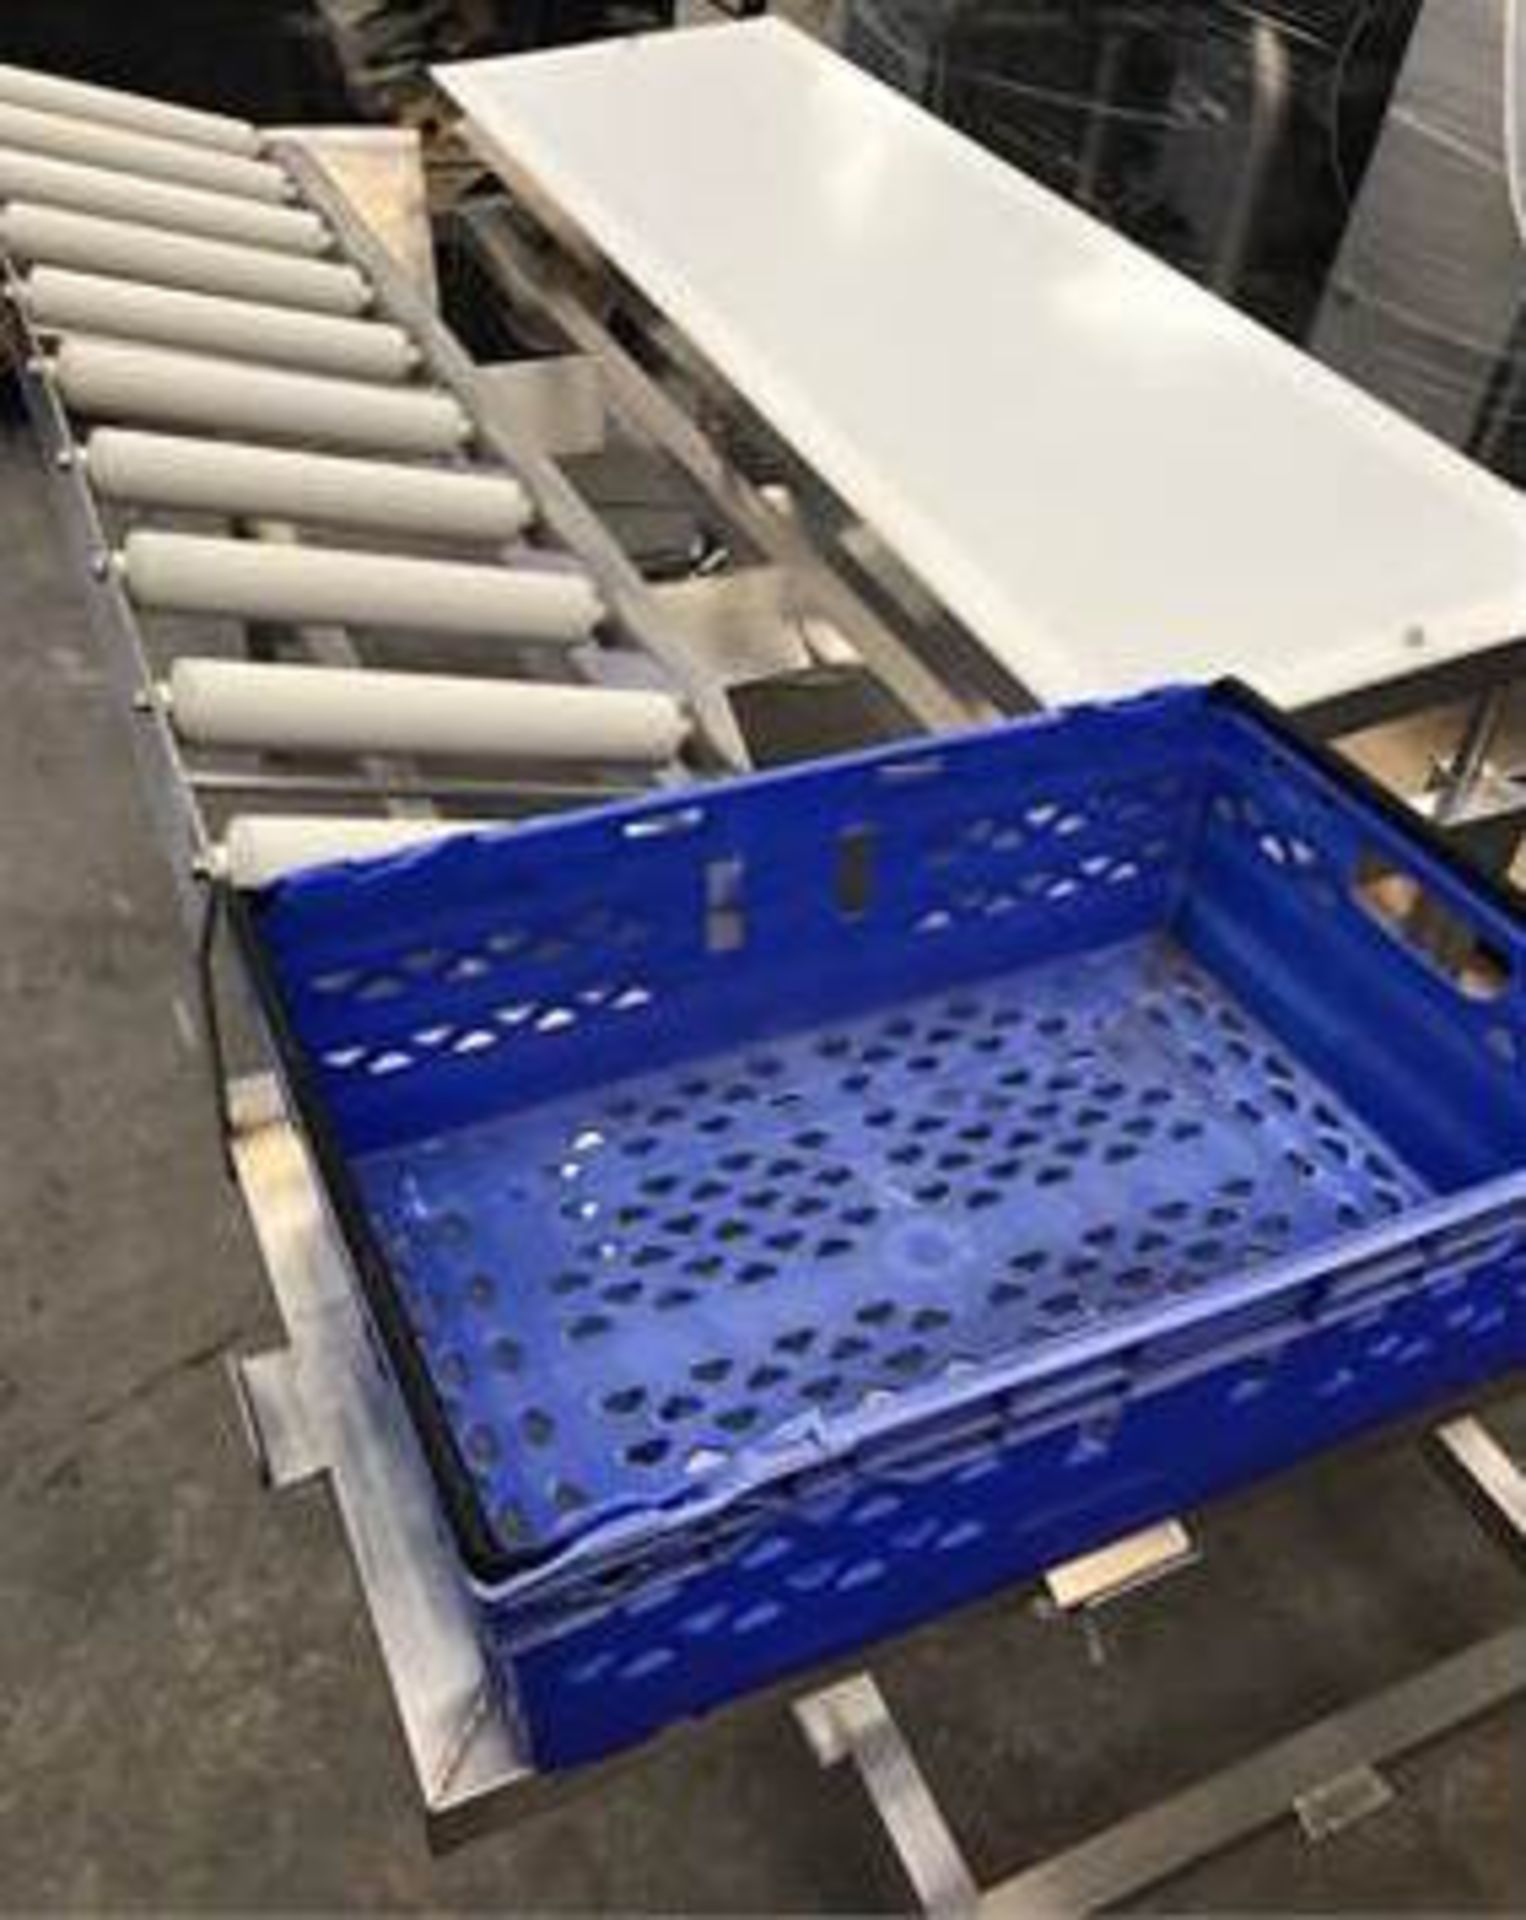 Packing Table. 1.5 metres long x 1 metre wide x 900mm high. With roller conveyor and basket.Lo£5